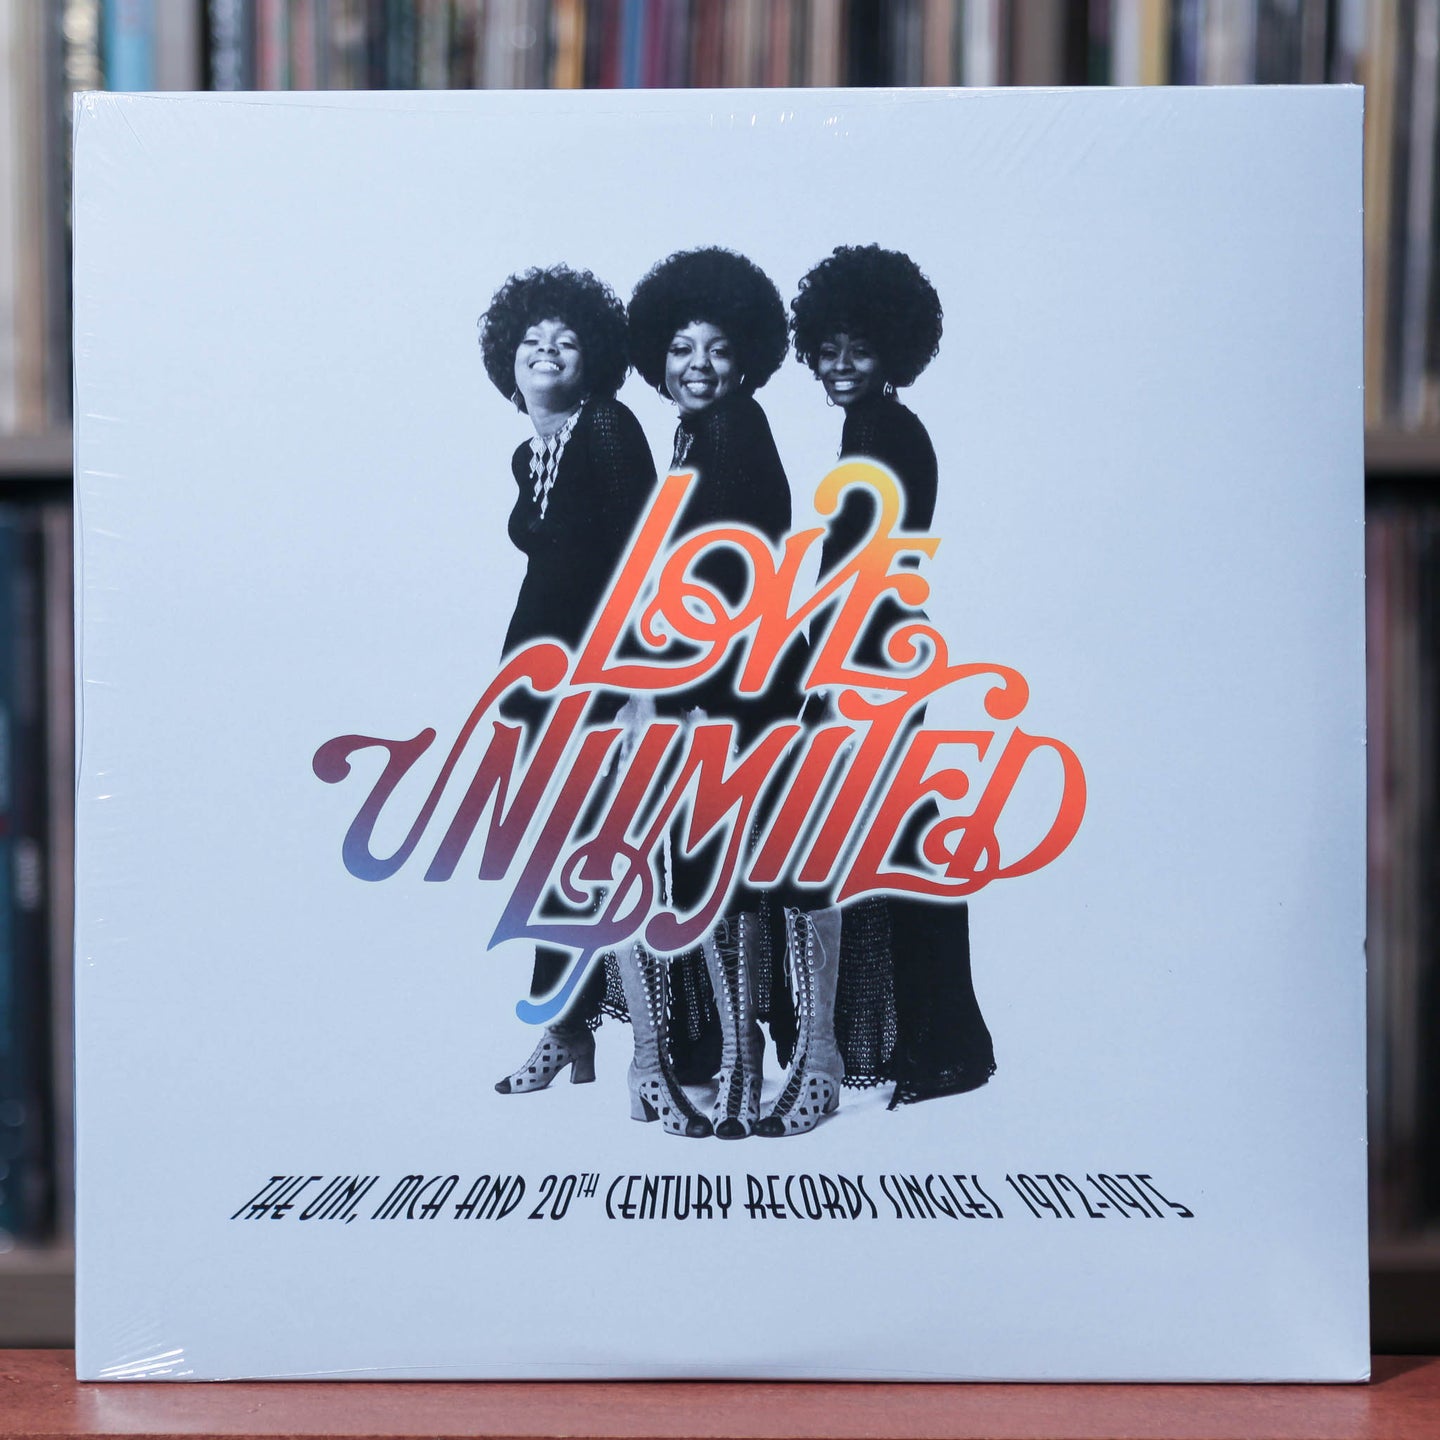 Love Unlimited - The UNI, MCA And 20th Century Records Singles 1972-1975 - 2LP - 2018 20th Century, SEALED